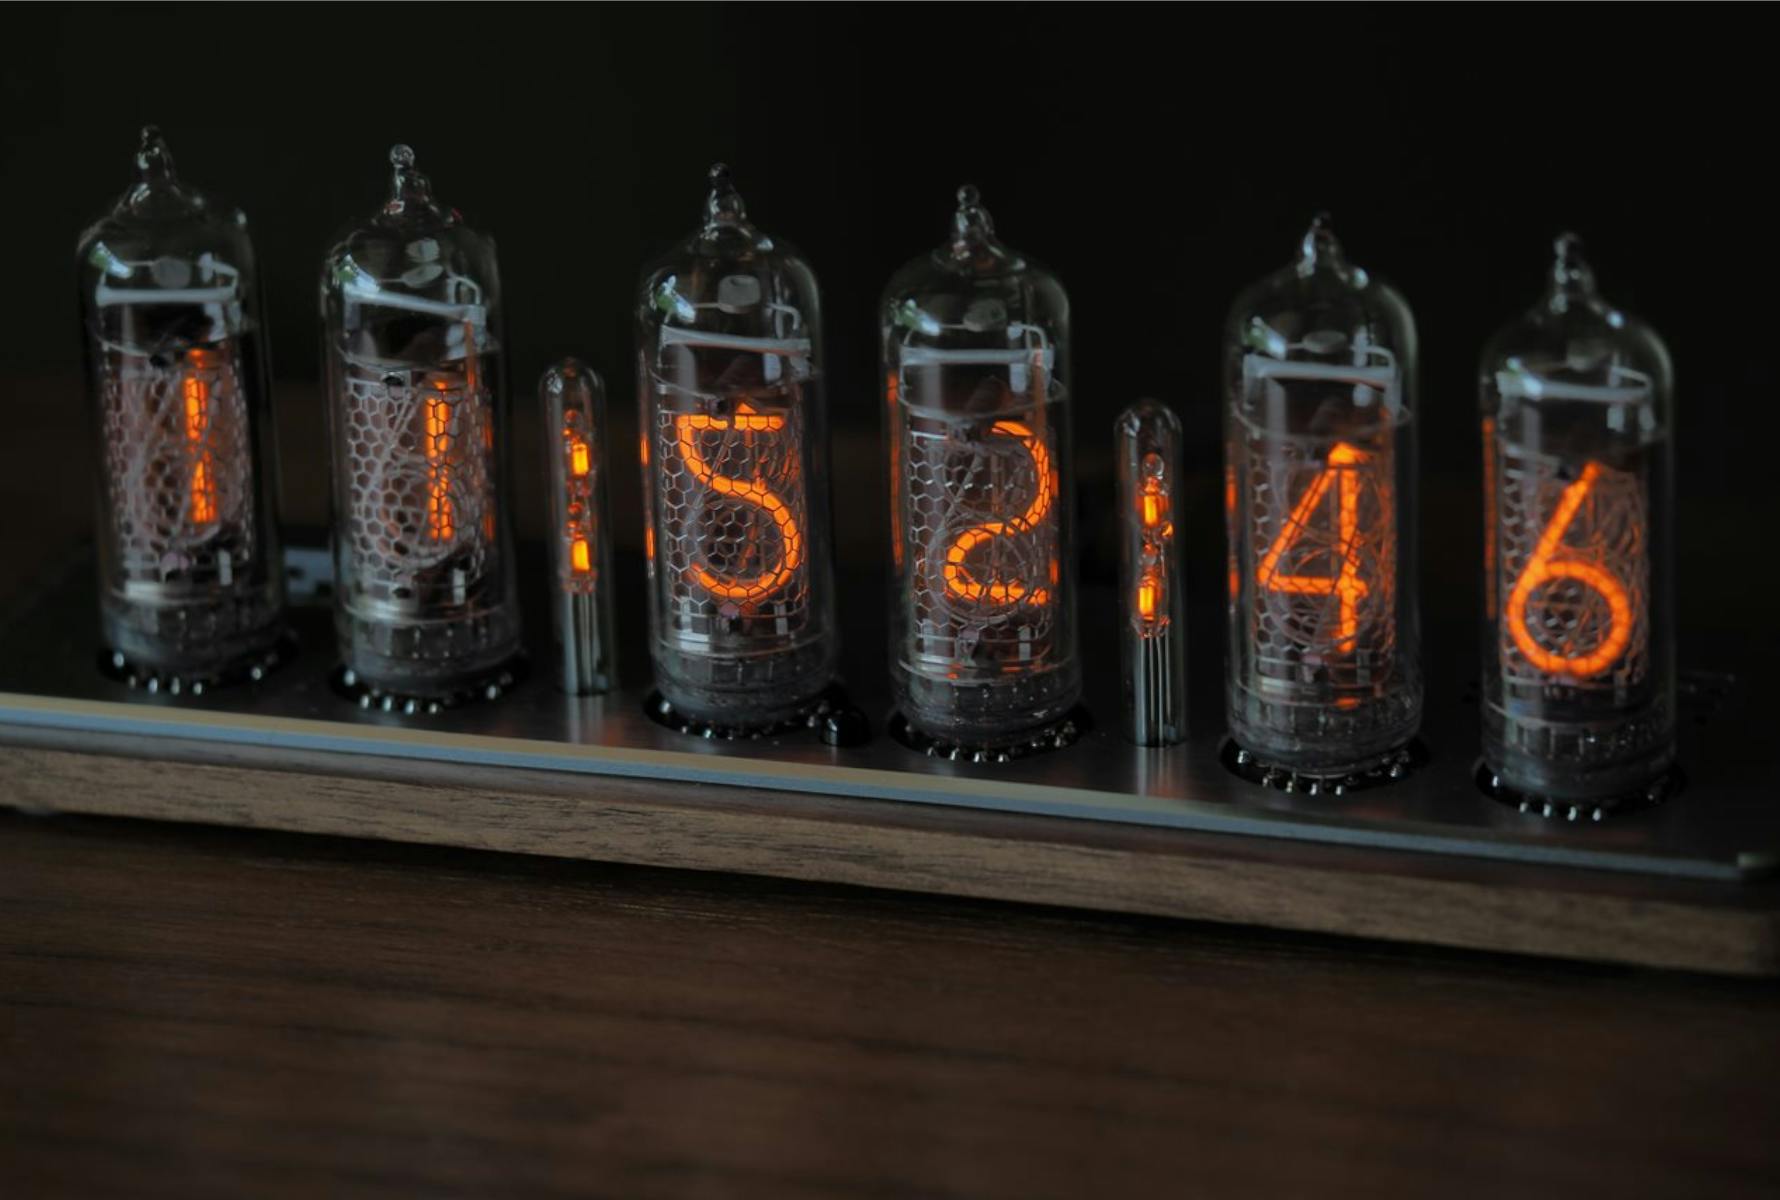 NEW限定品 ニキシー管時計 Nixie Tube IN-14 USB 4-tubesの通販 by うにとろ's shop｜ラクマ 